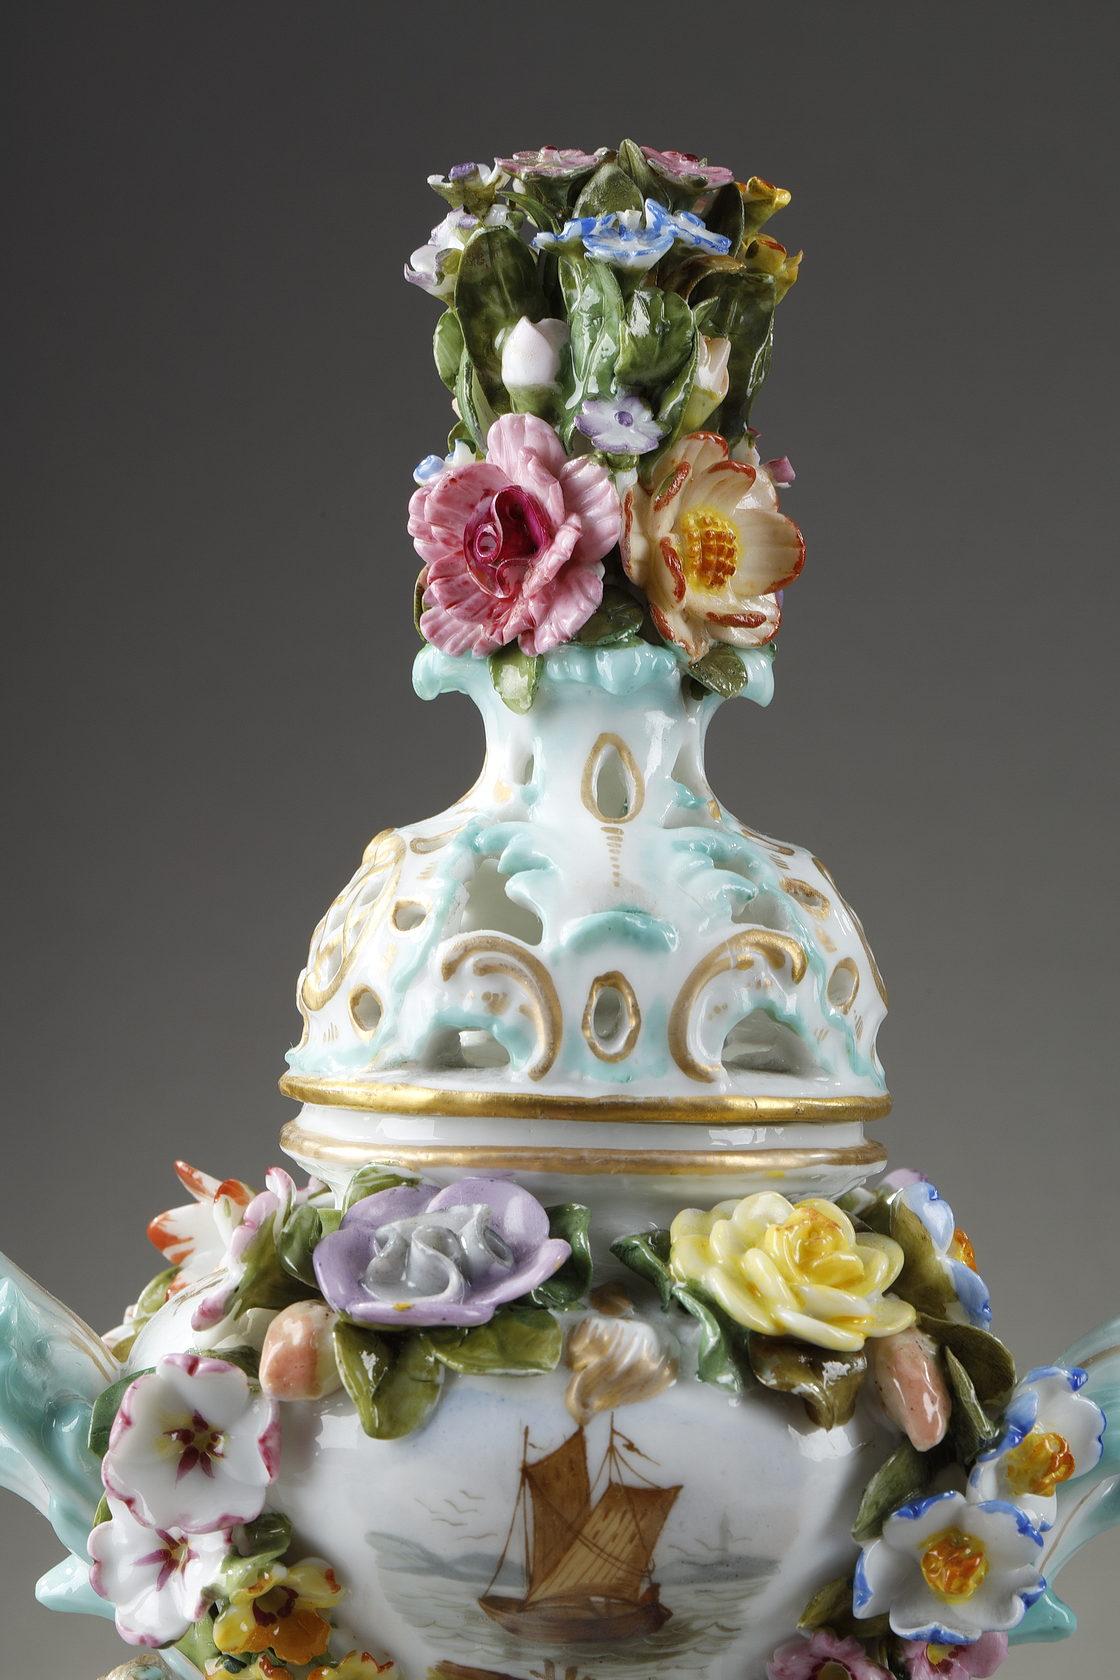 Early 19th Century Perfume burner in polychrome porcelain from the Meissen manufacture